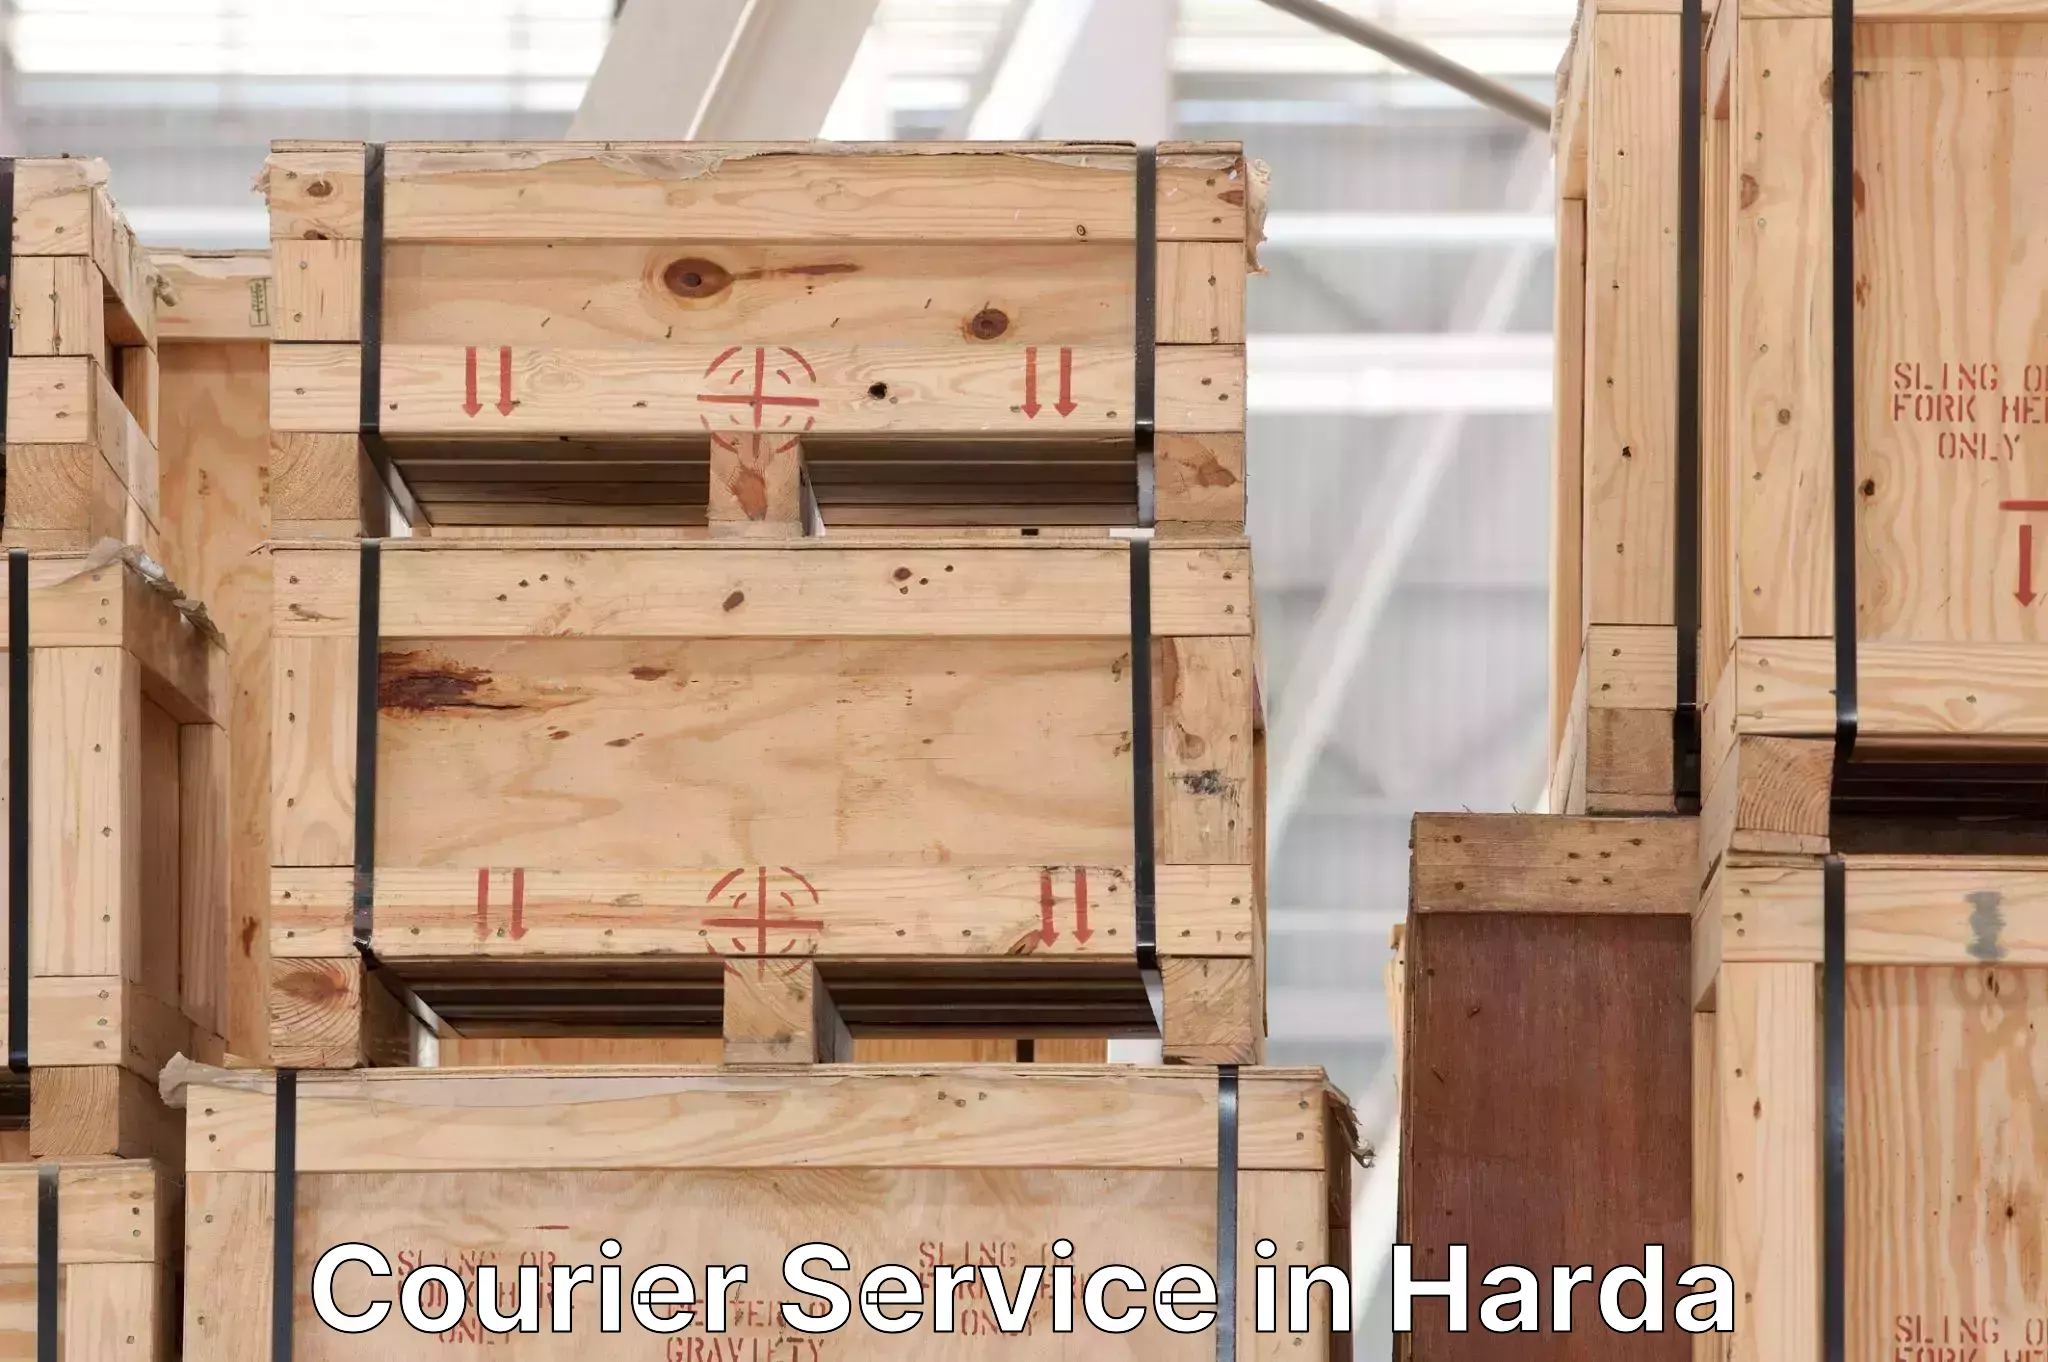 State-of-the-art courier technology in Harda